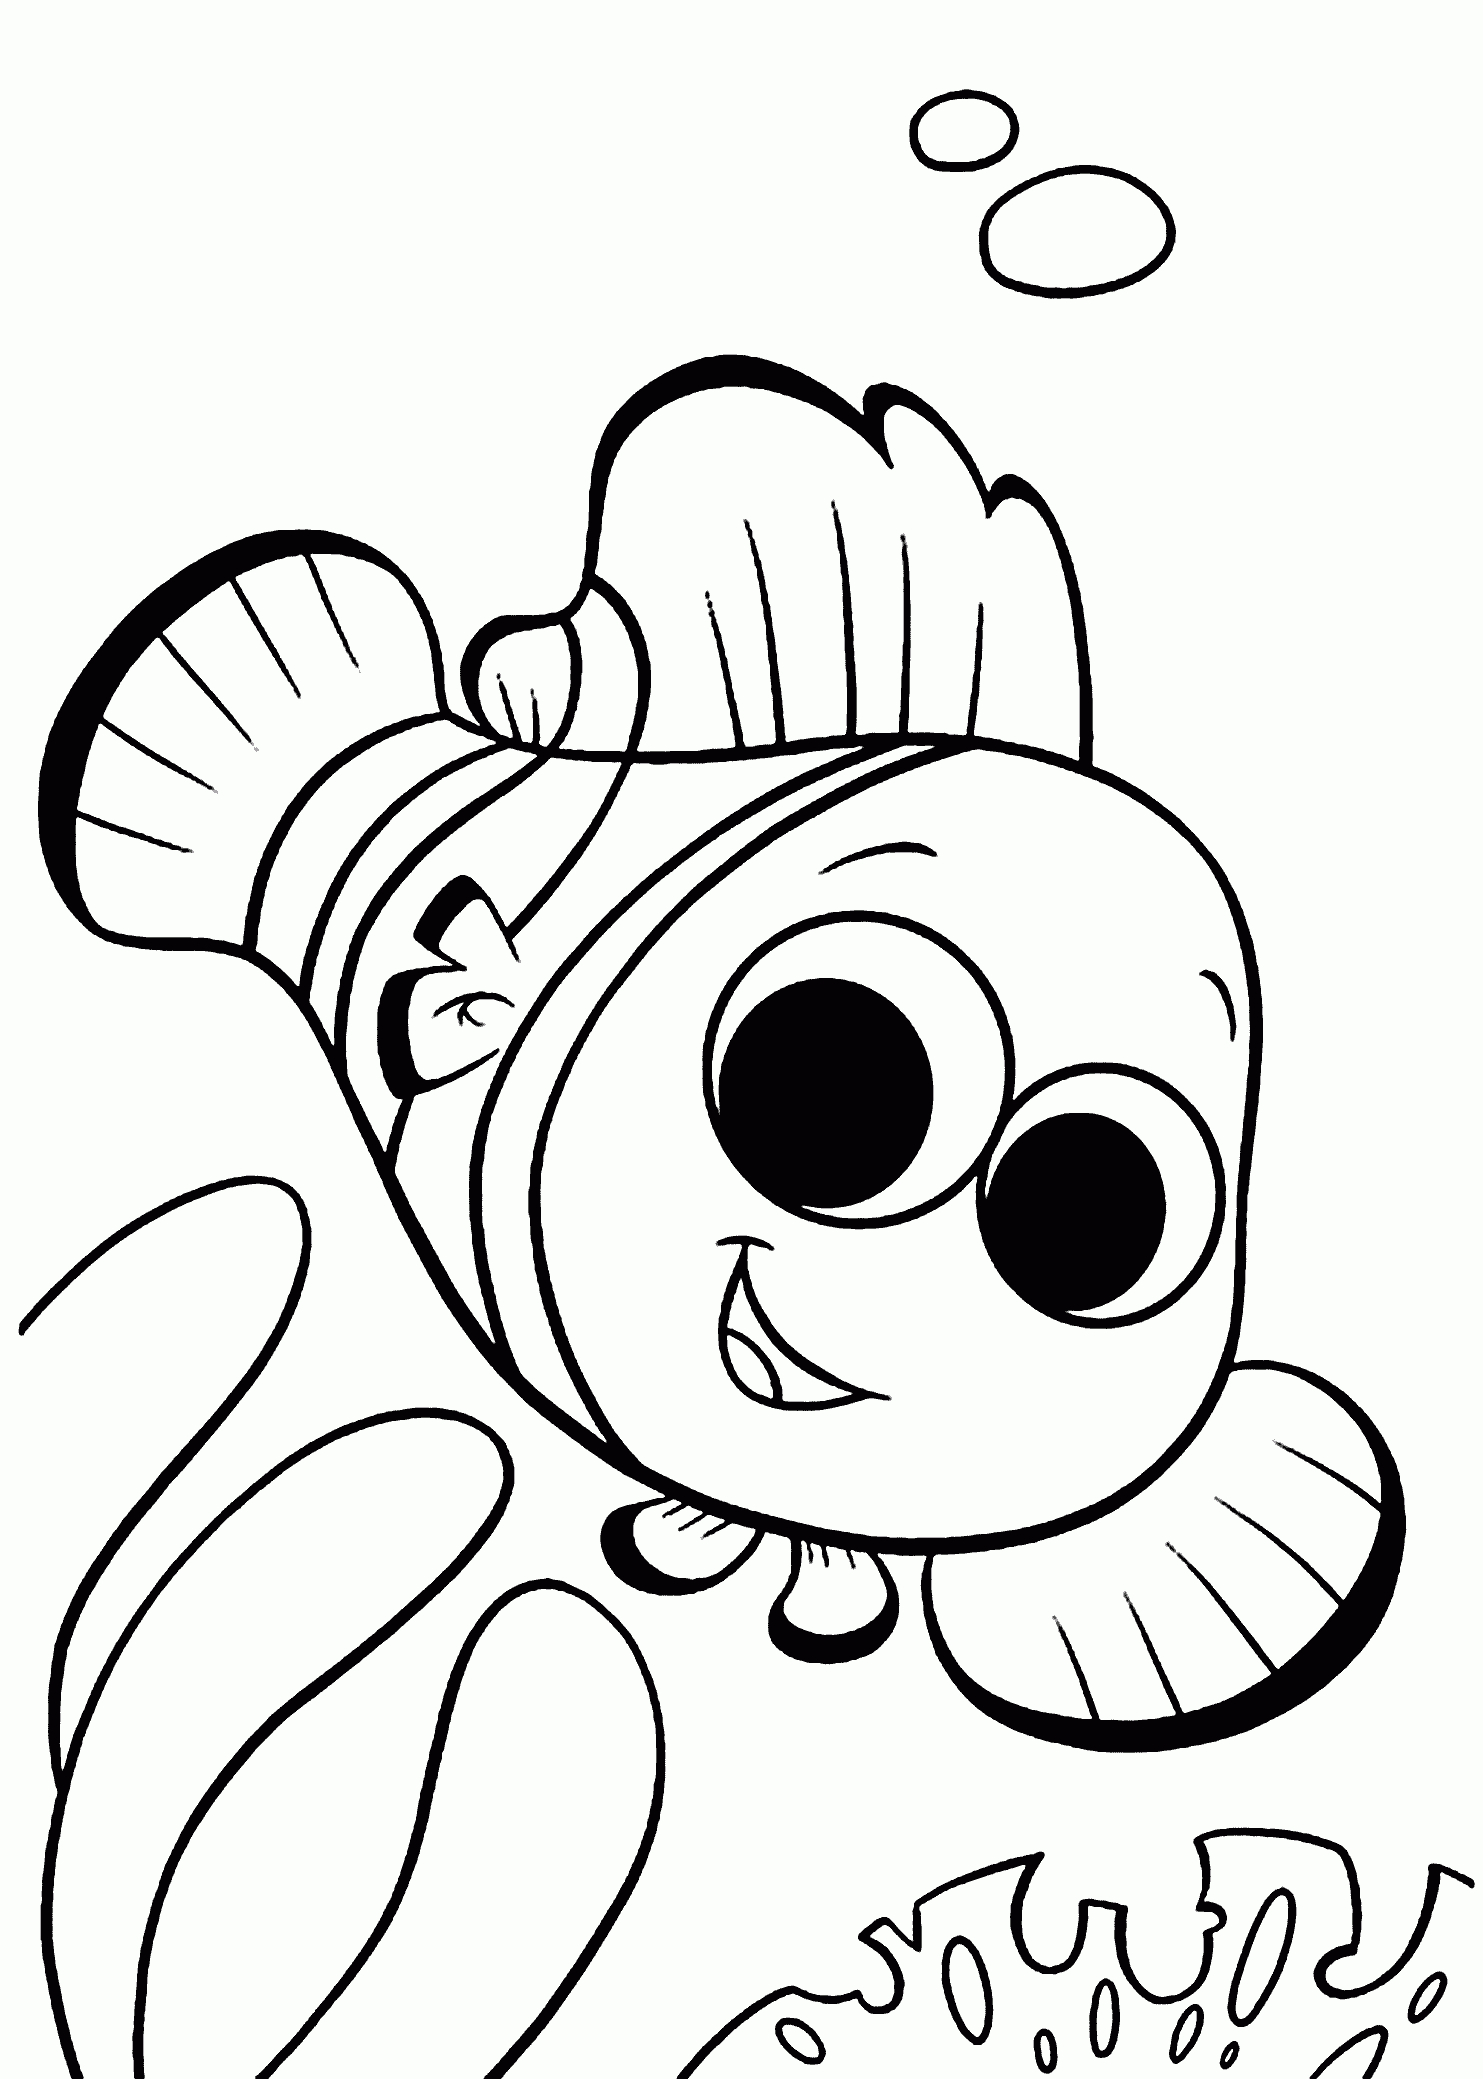 Finding Nemo Coloring Pages For Kids, Printable Free | Coloring - Free Printable Coloring Pages For Kids